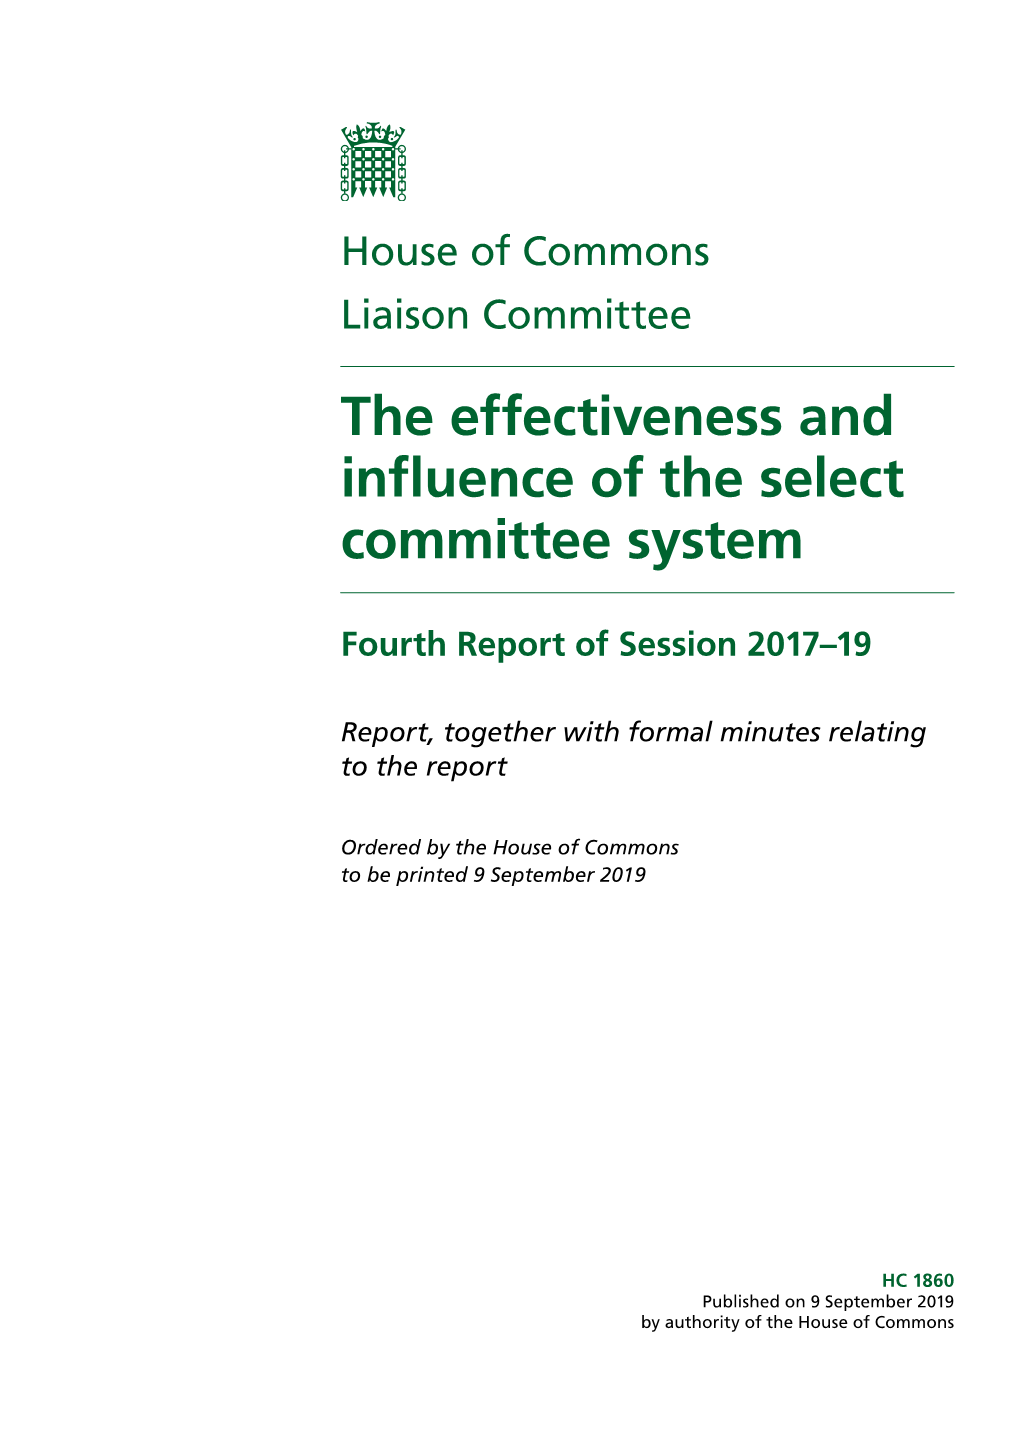 The Effectiveness and Influence of the Select Committee System